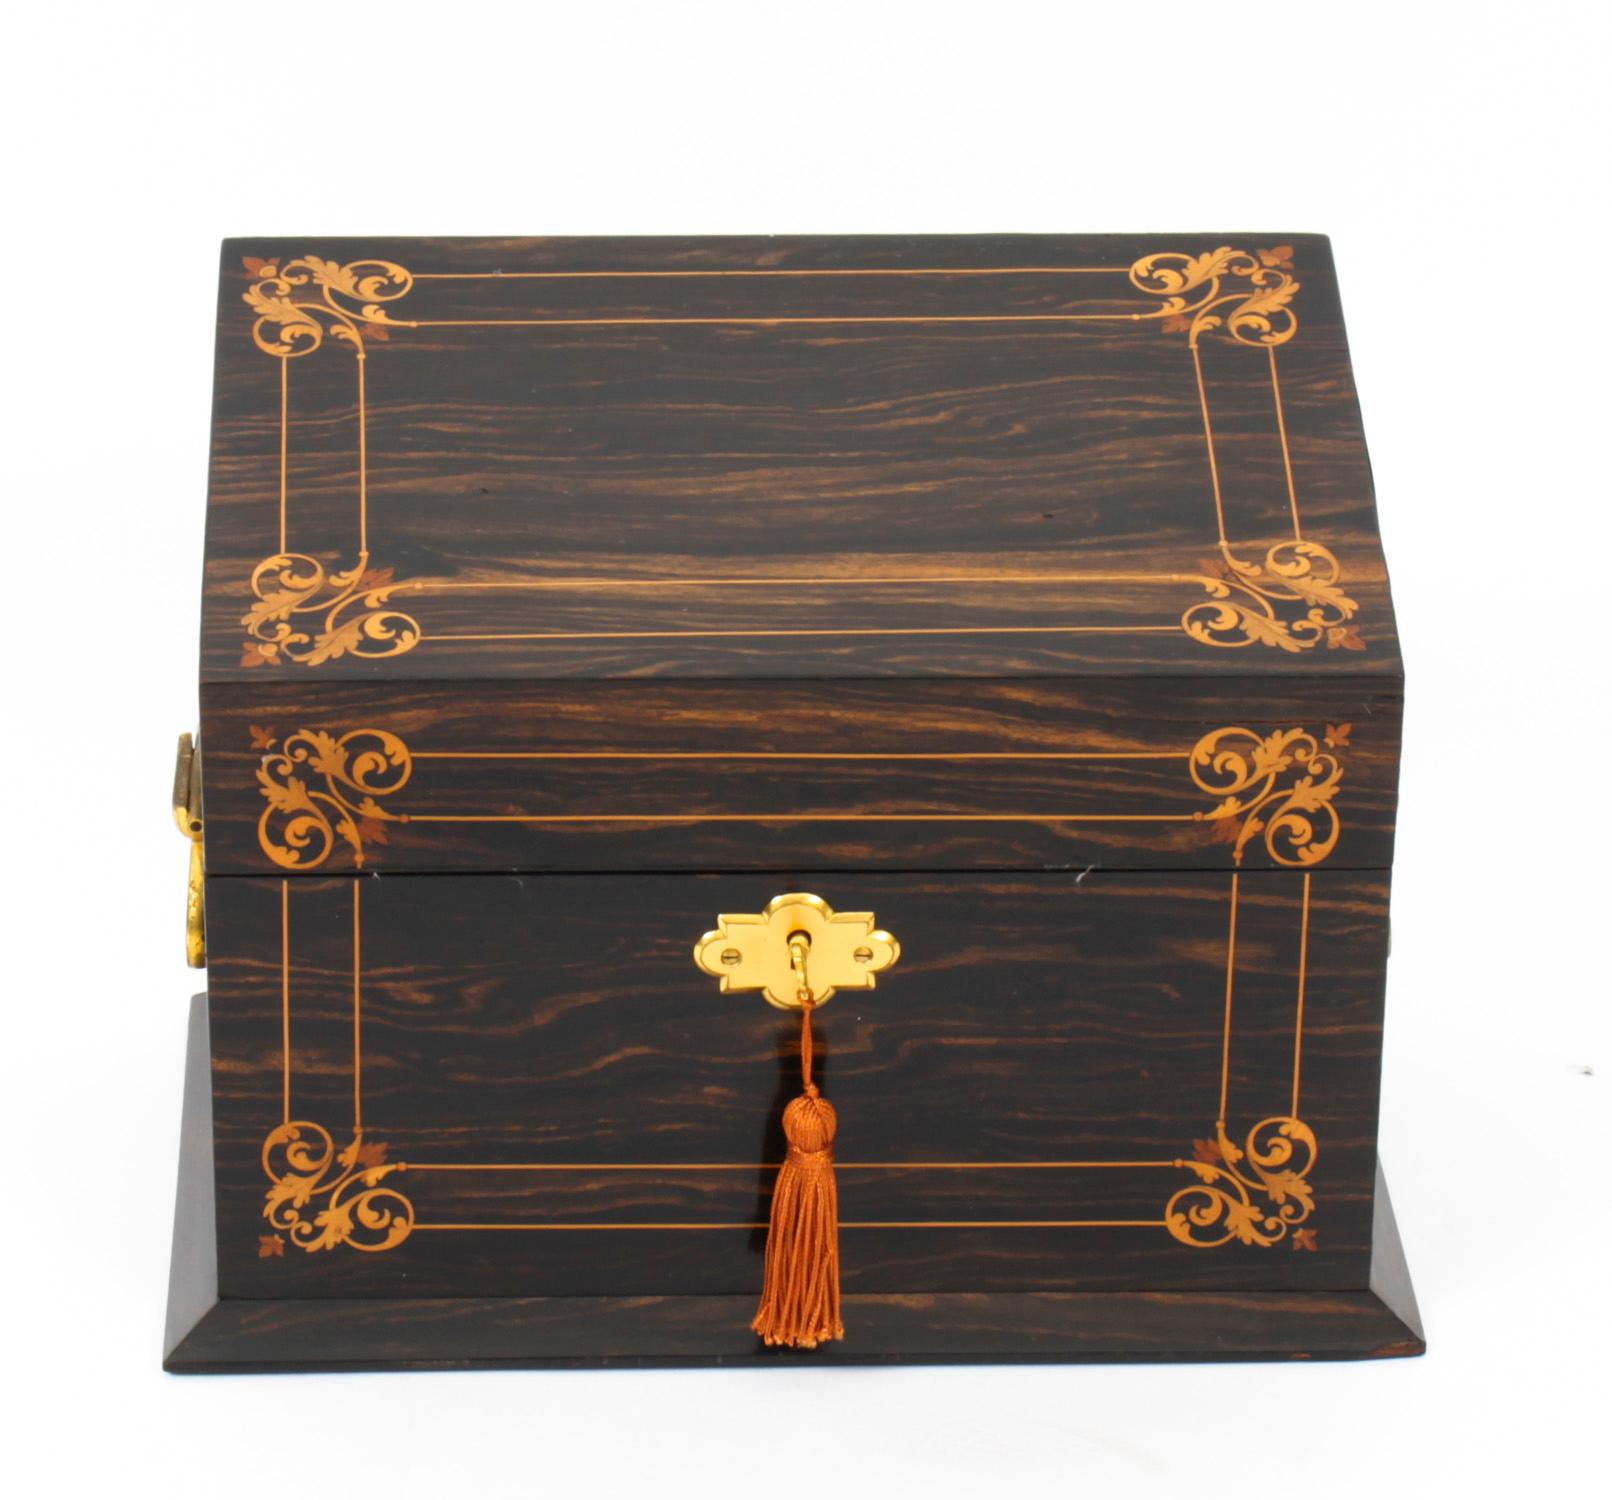 This is a stunning antique Victorian coromandel, Marquetry and gilt bronze mounted stationery box casket, circa 1870 in date.

Elegantly decorated with specimen marquetry with gilt bronze handles to each side, the rectangular casket has a sloped